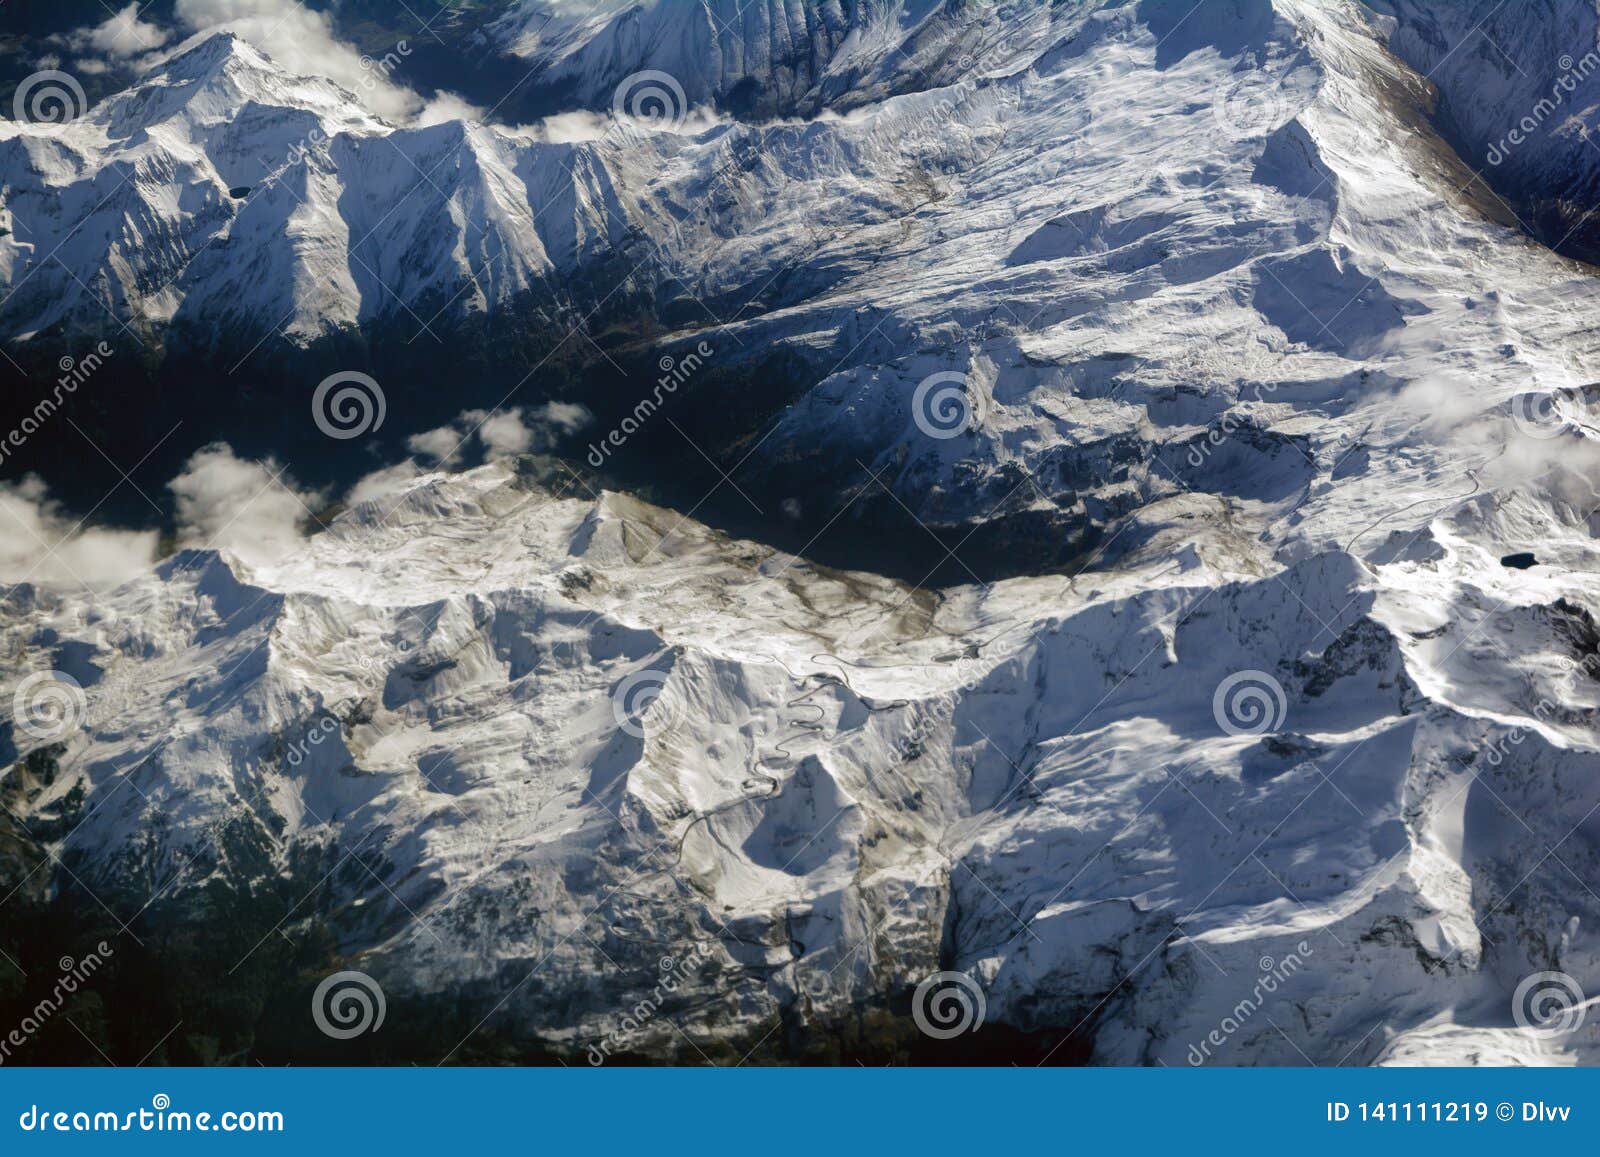 Aerial View of Snowy Mountains Peaks and a Winding Serpentine, Road, Opposite the Sunlight Image - of horizontal, background: 141111219